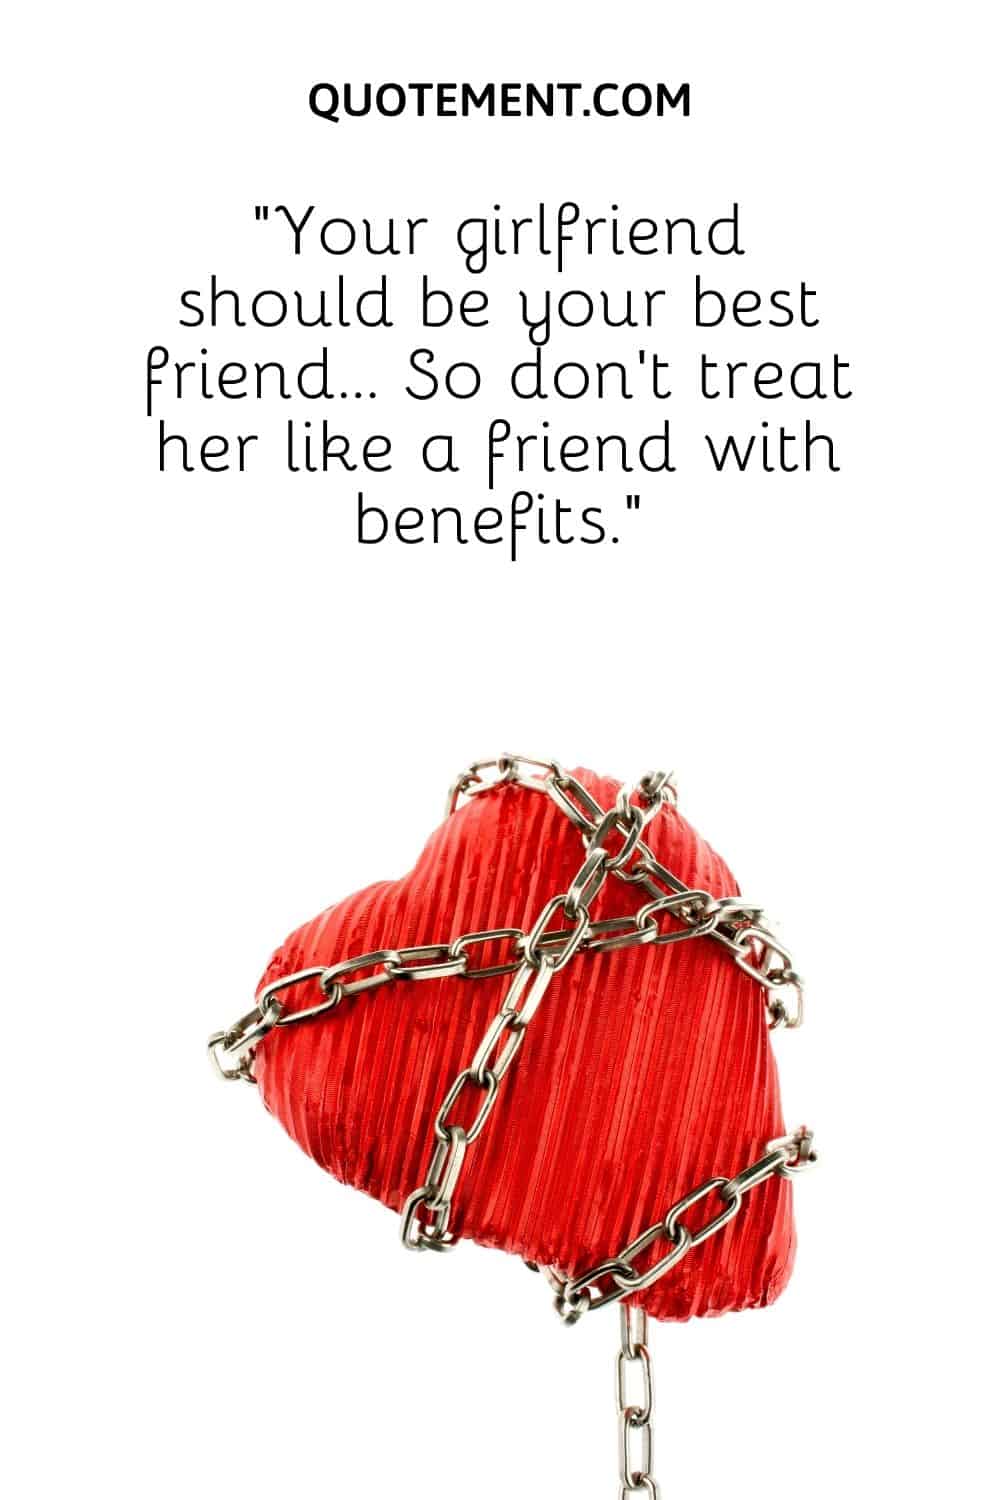 “Your girlfriend should be your best friend… So don’t treat her like a friend with benefits.”